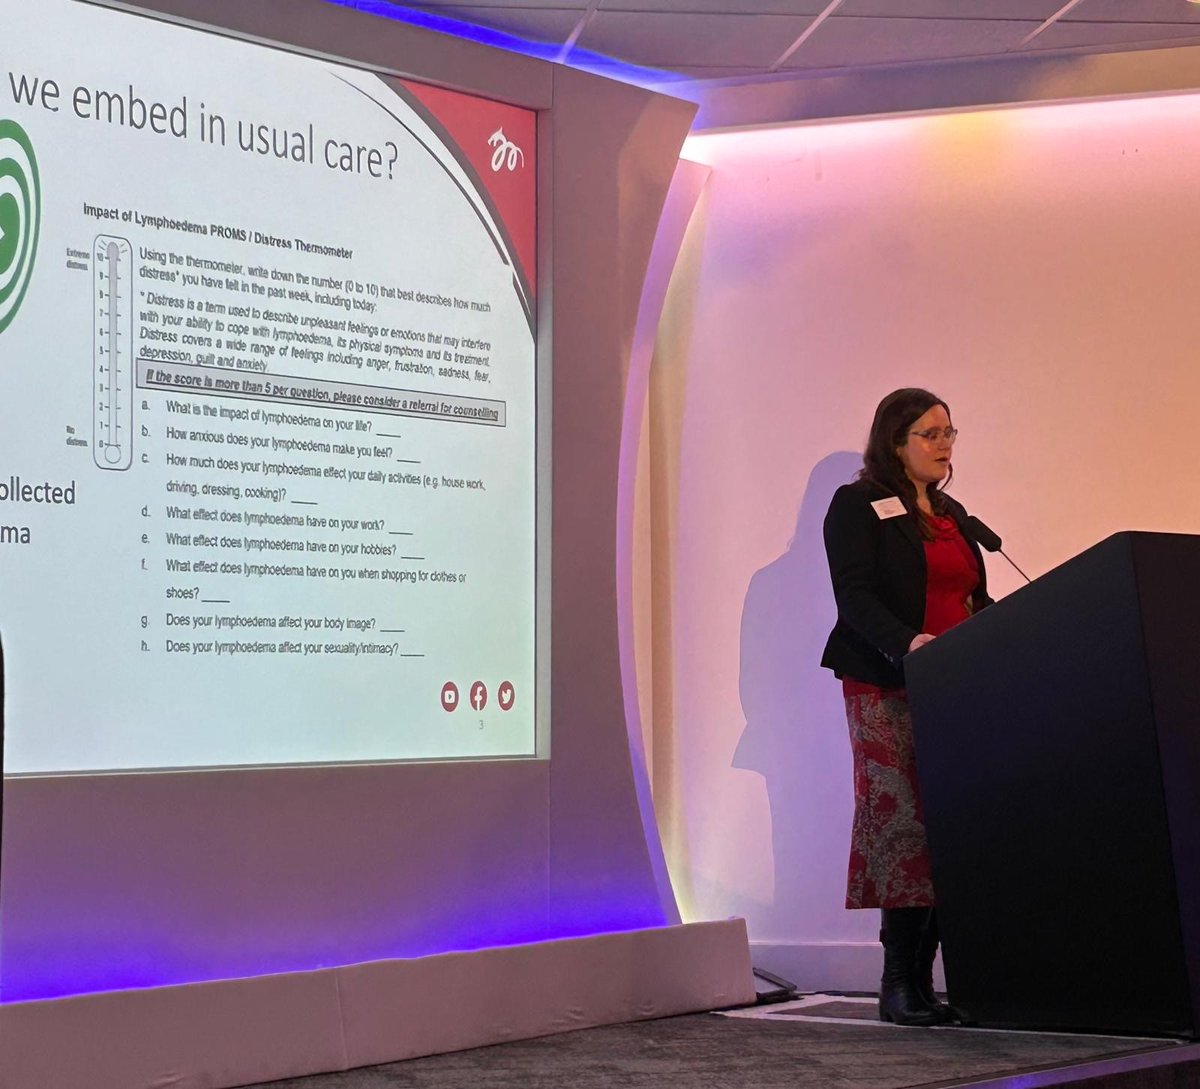 Dr. Marie Gabe-Walters, National Research and Innovation Lymphoedema Specialist, Lymphoedema Wales Clinical Network presenting “Getting the best from patient reported measures in lymphoedema care” at the 11th Annual National Lymphoedema Conference held yesterday in London.